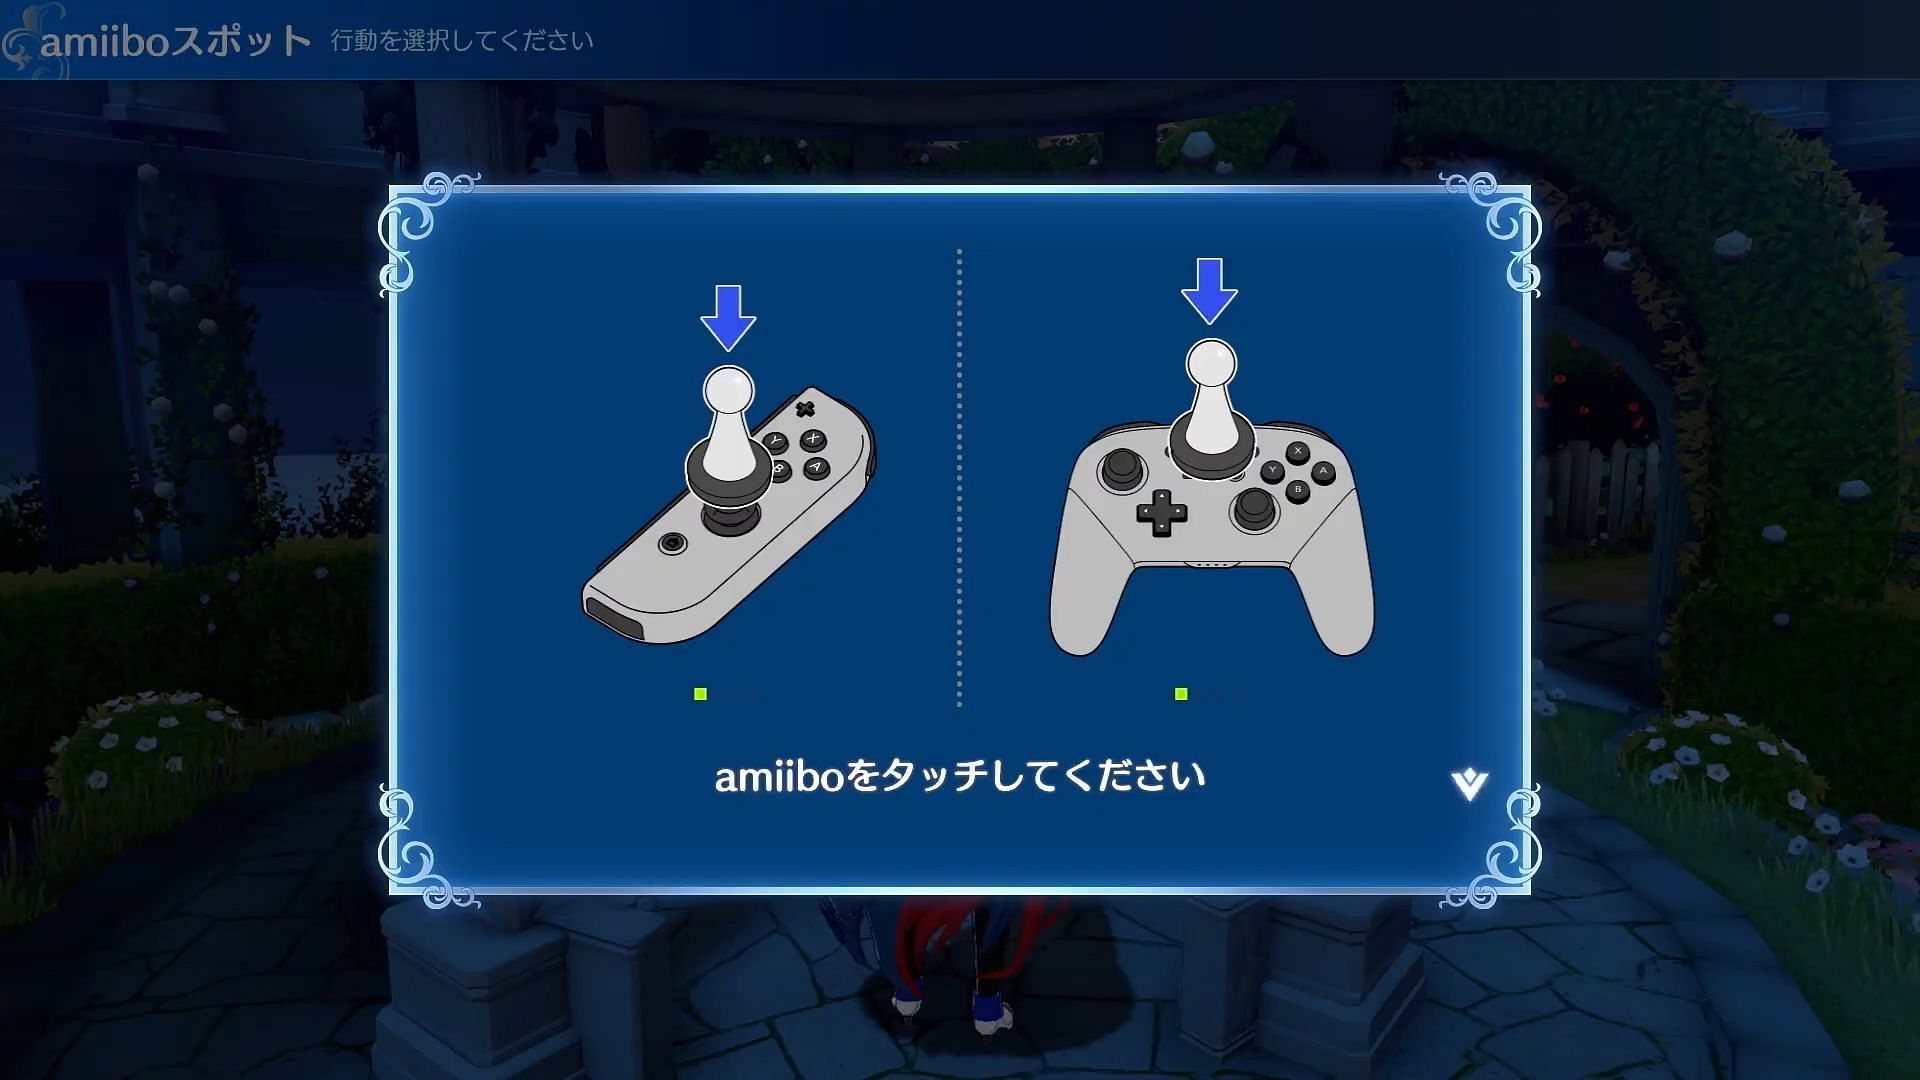 Fire Emblem Engage features Amiibo support to unlock a wide range of in-game cosmetics (Image via YouTube/Meme Lord)